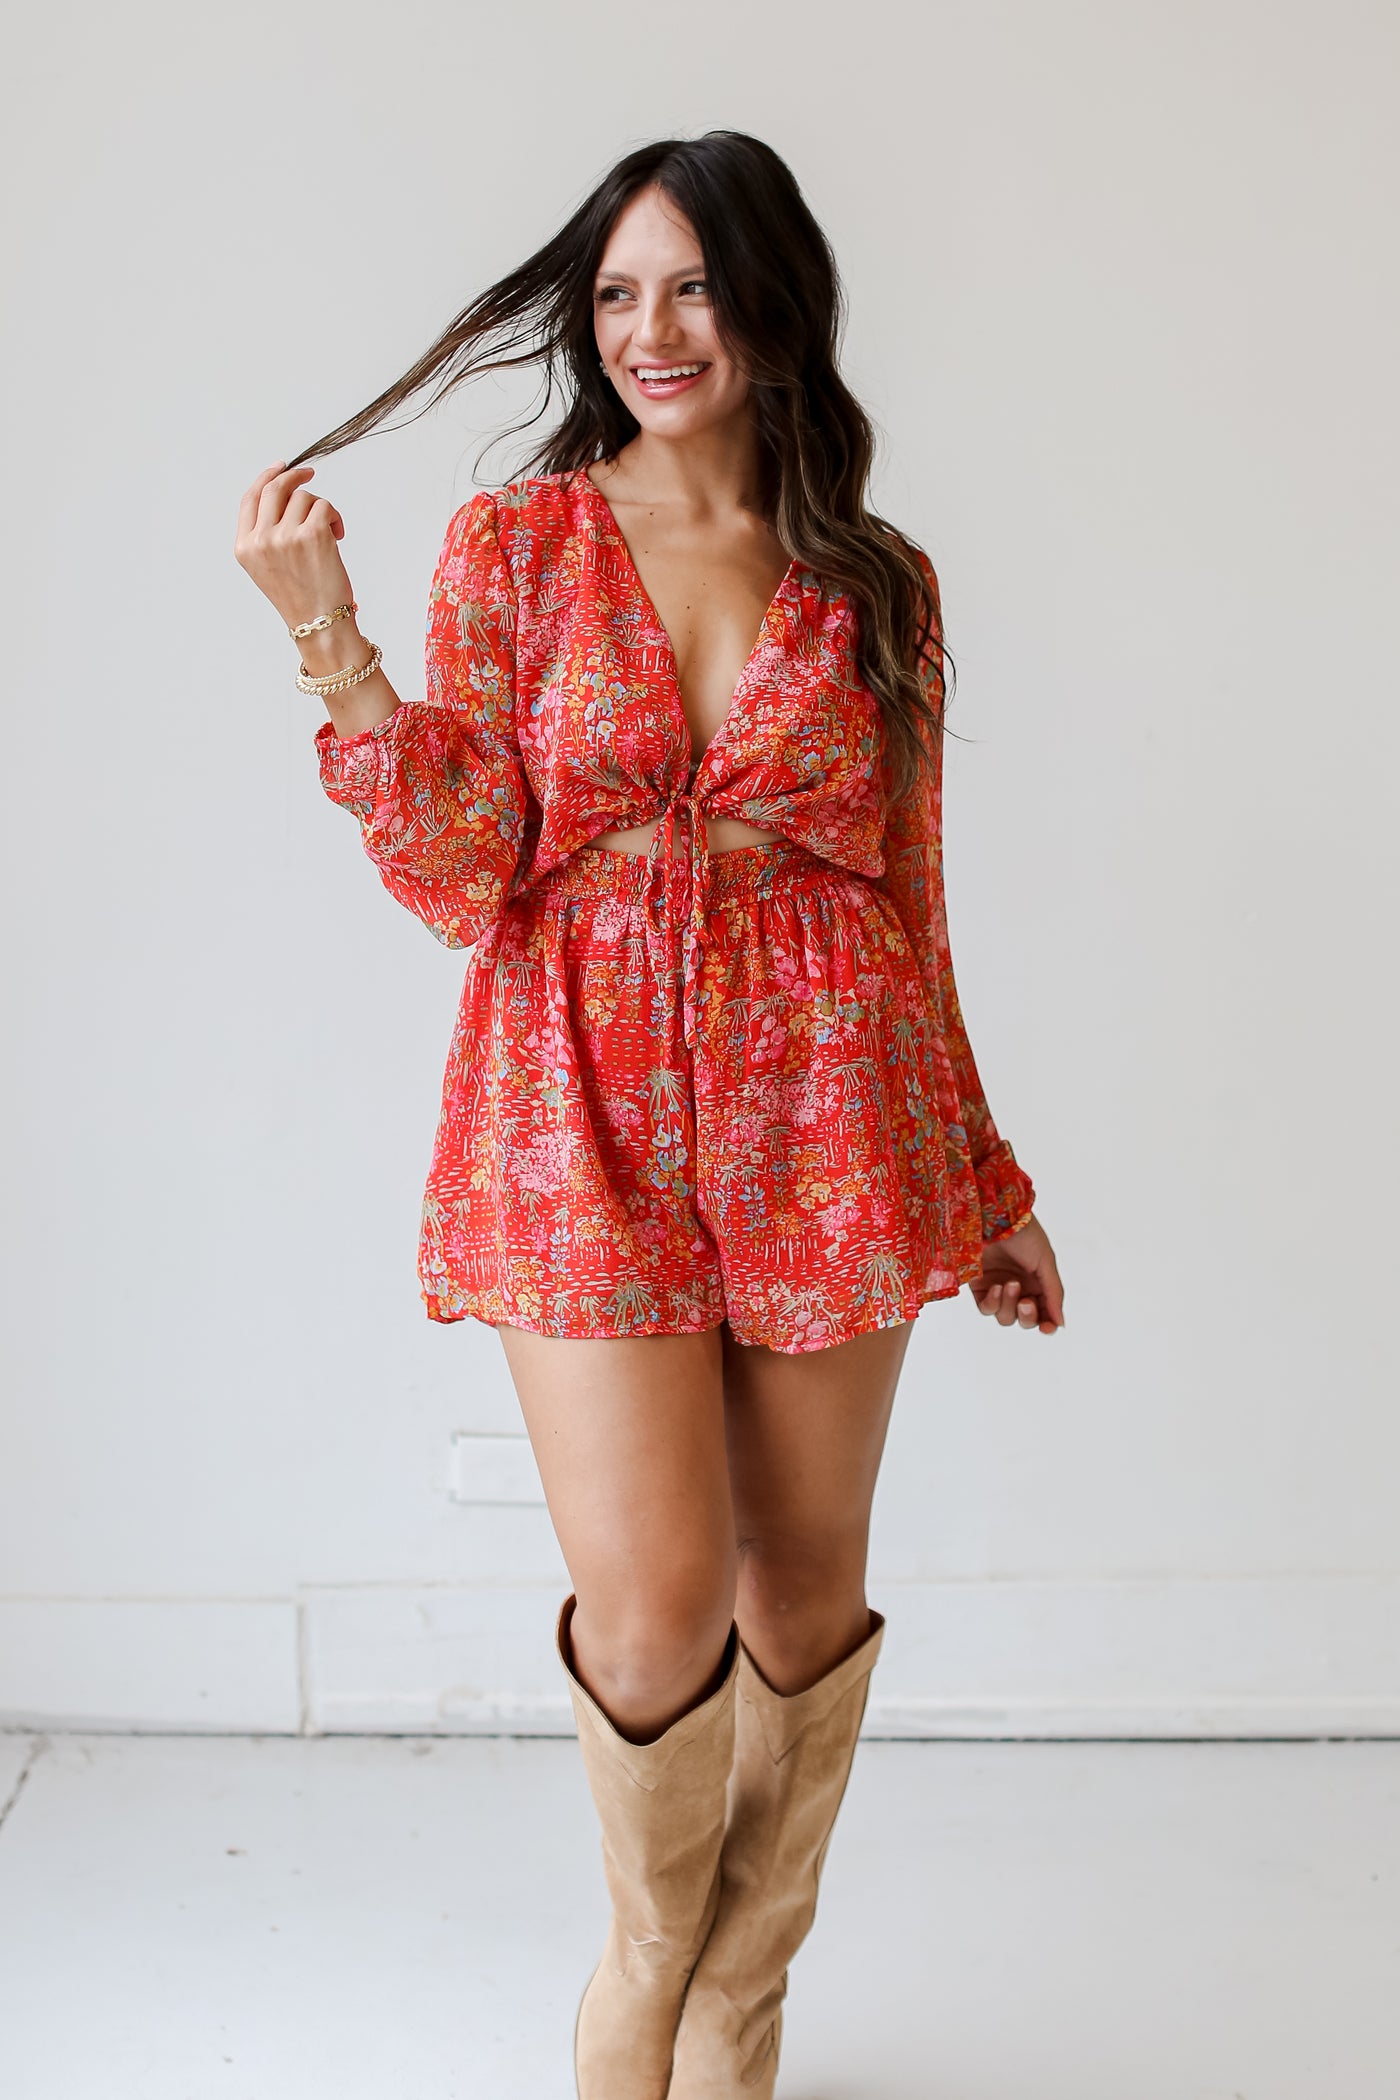 model wearing a red Floral Romper